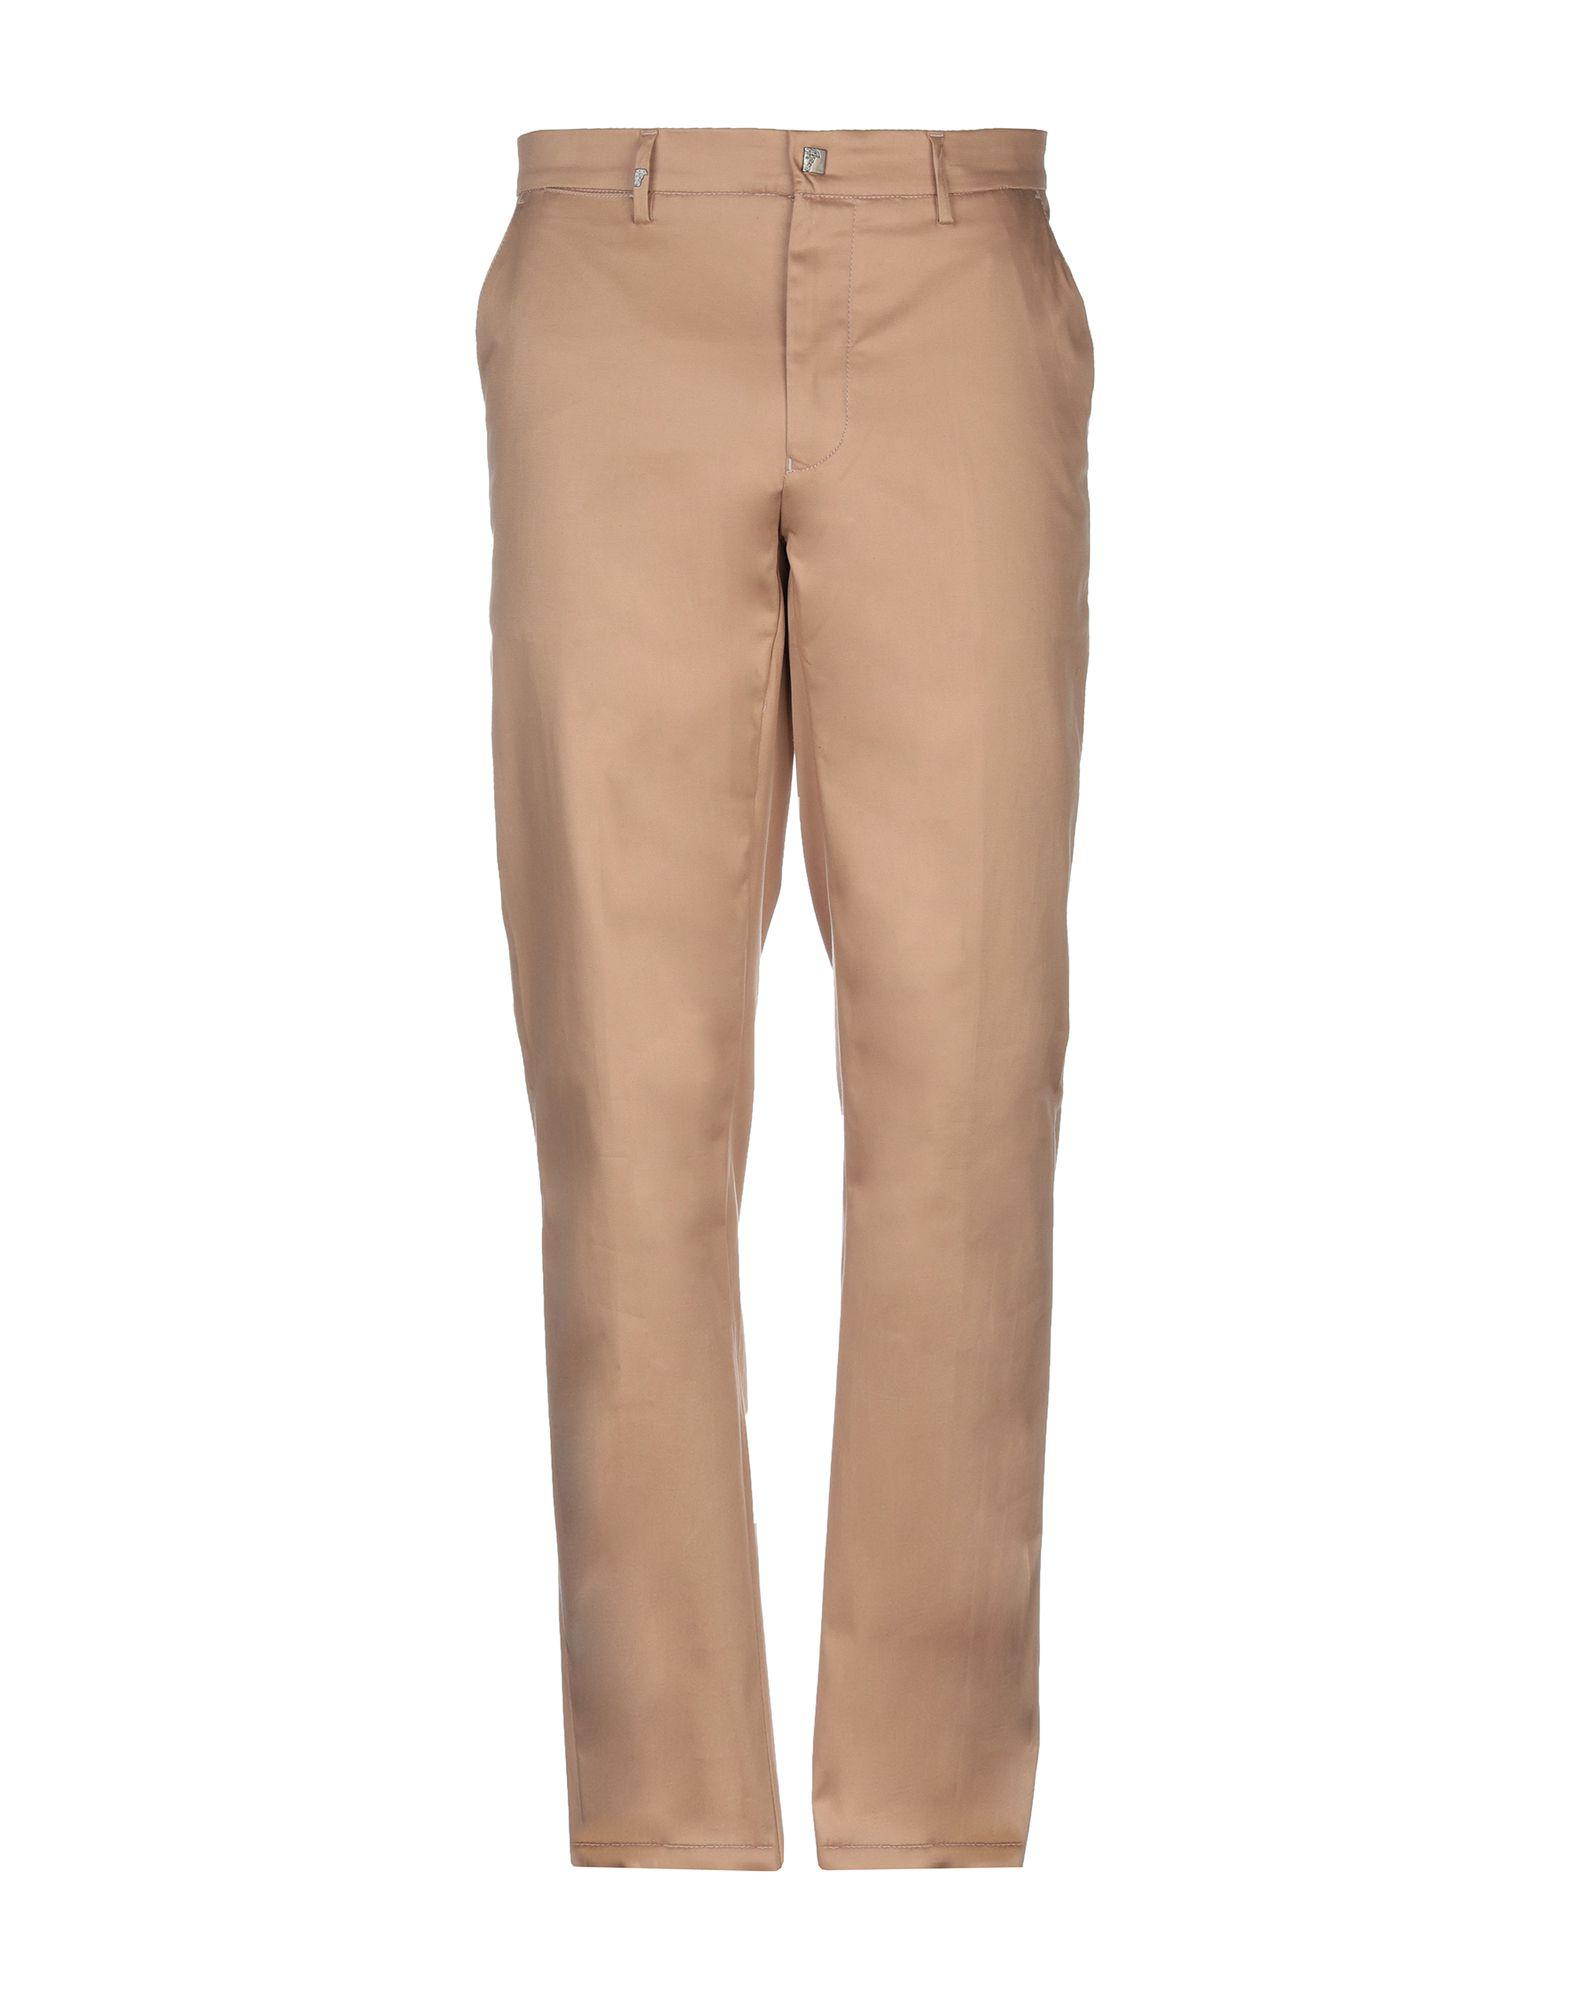 Versace Cotton Casual Pants in Light Brown (Brown) for Men - Lyst